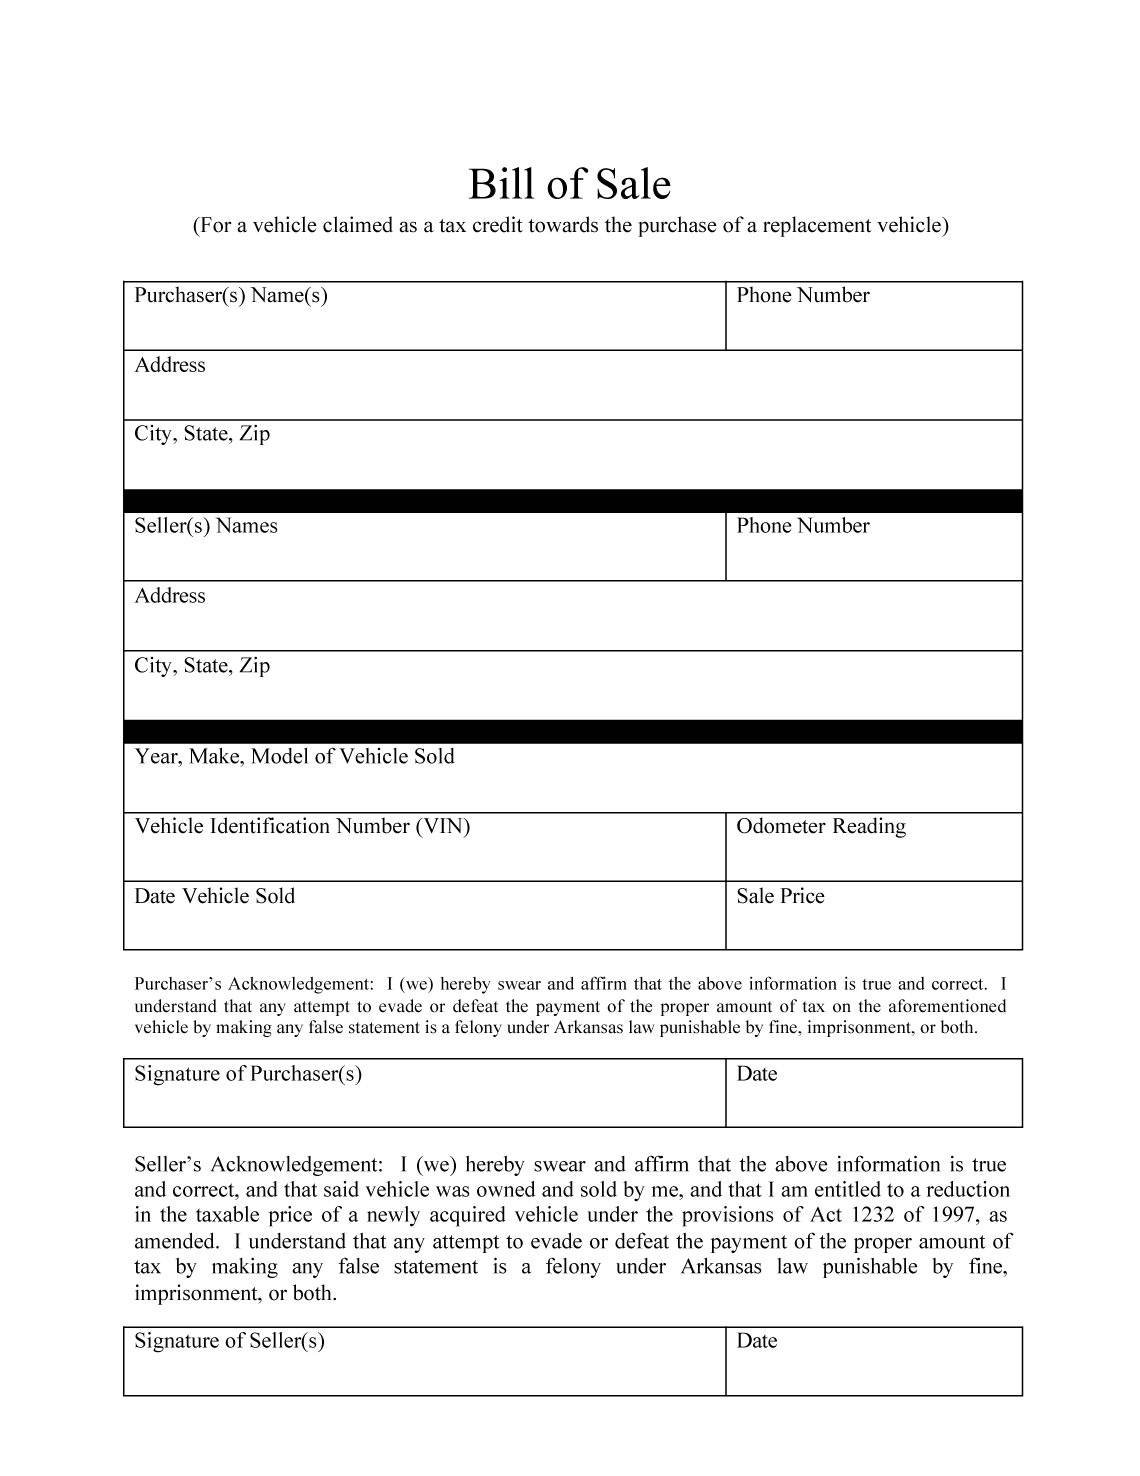 alberta-registries-bill-of-sale-form-fill-out-and-sign-printable-pdf